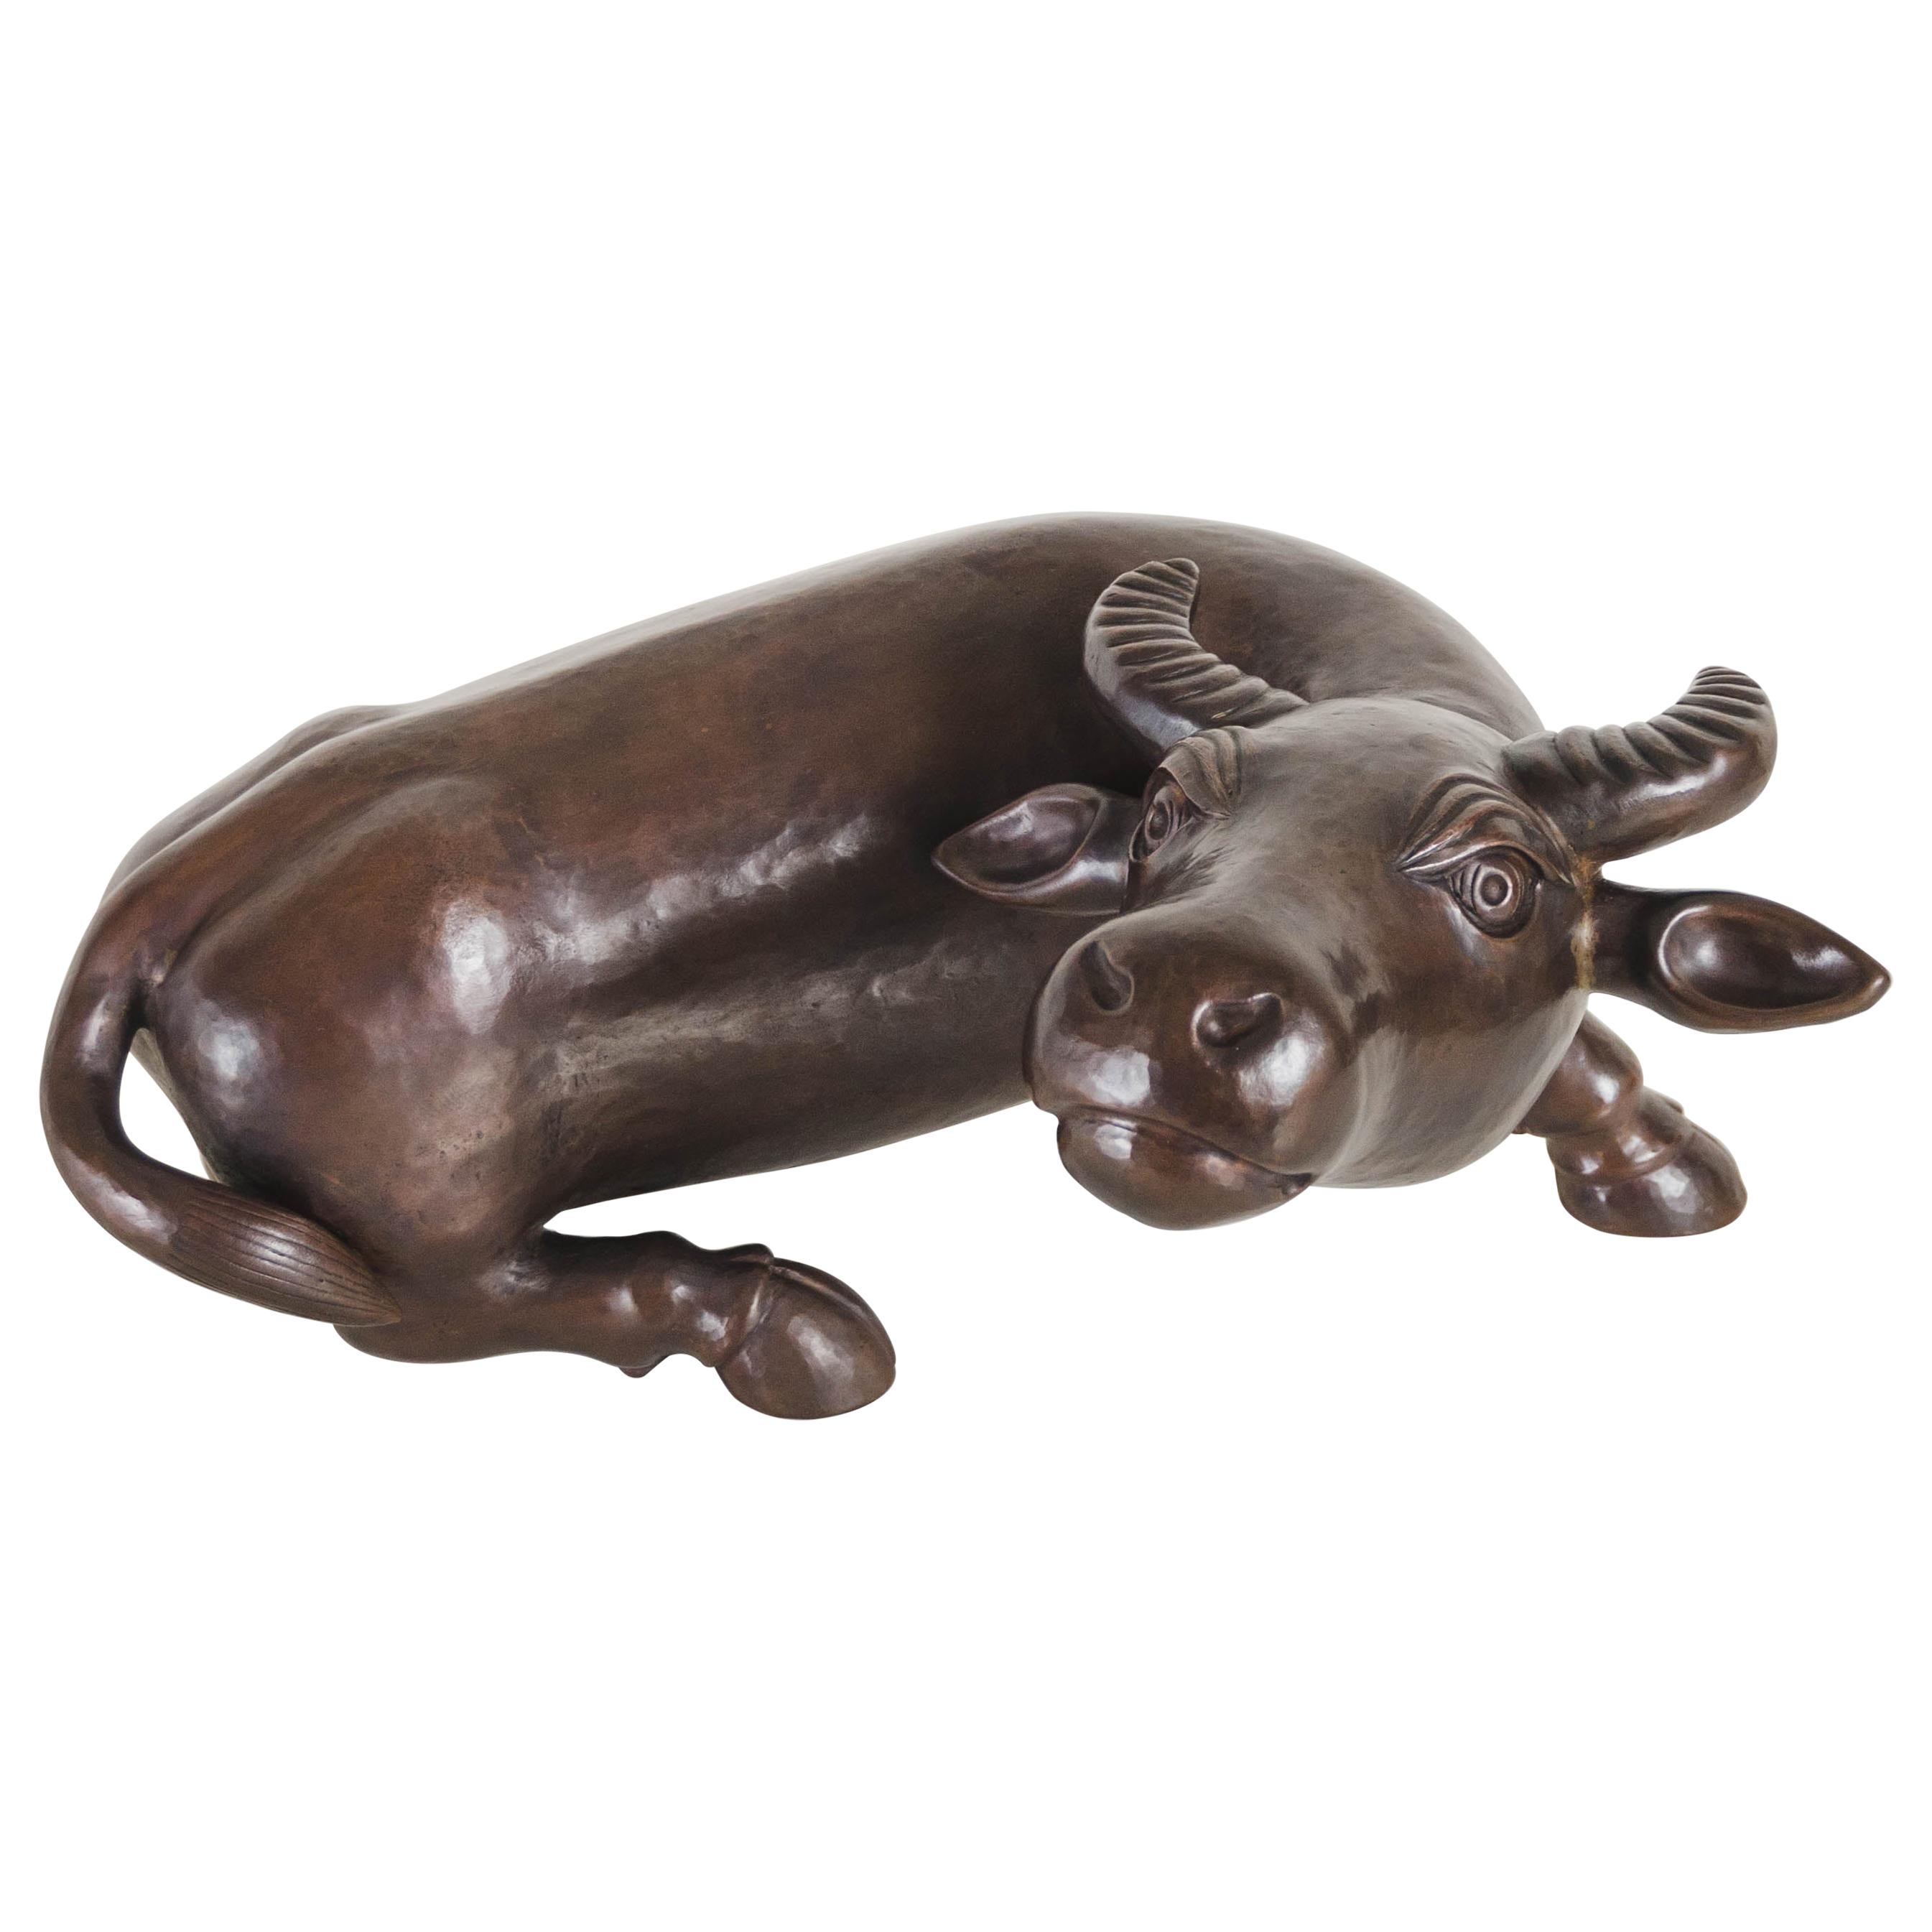 Contemporary Hand Repoussé Water Ox Sculpture in Antique Copper by Robert Kuo For Sale